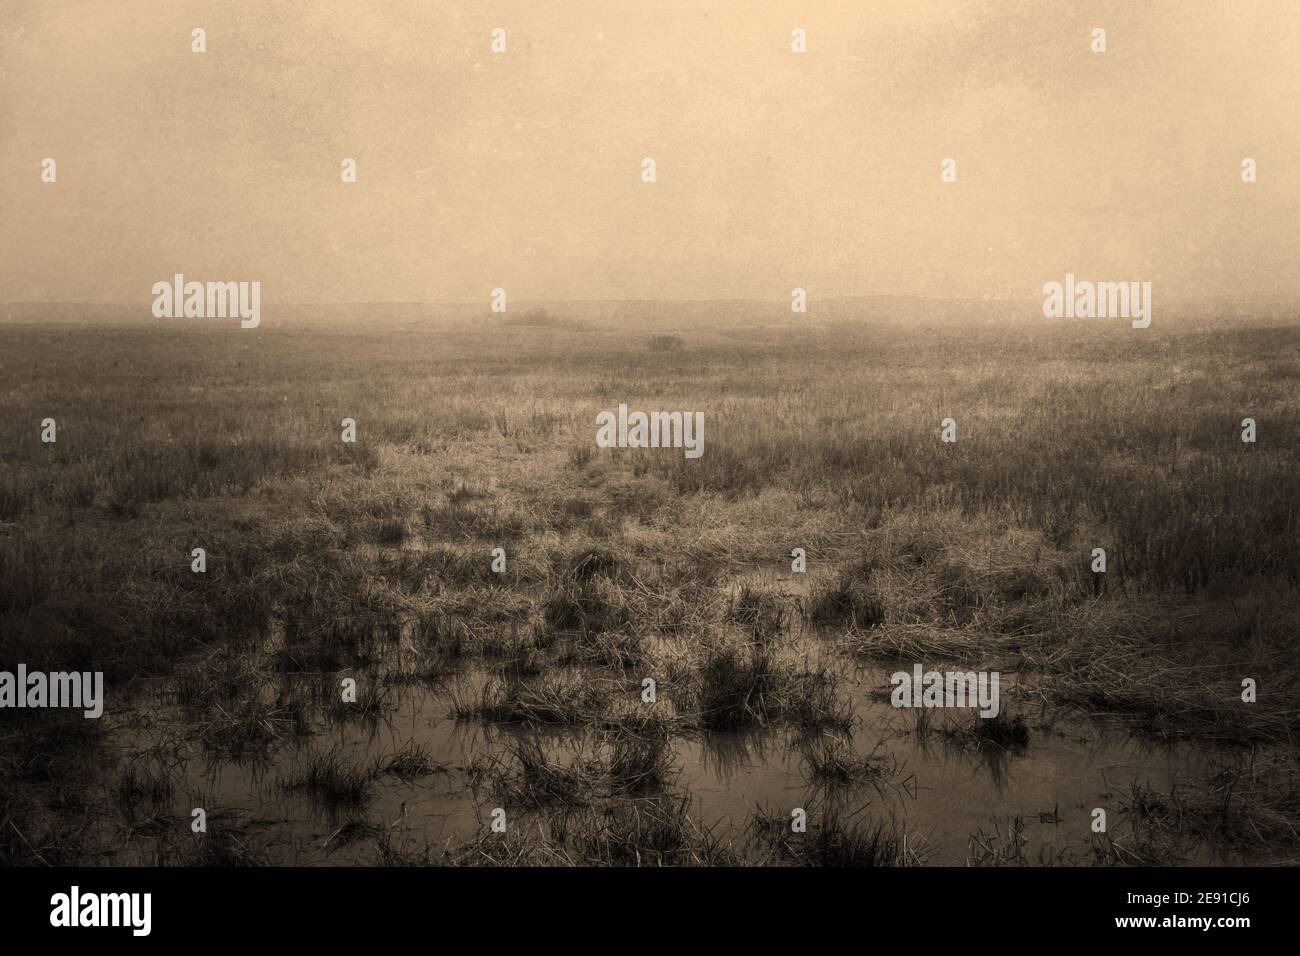 Stylized Foggy Grassland Background with Marsh, Gritty Sepia Texture, and Blank Space Stock Photo